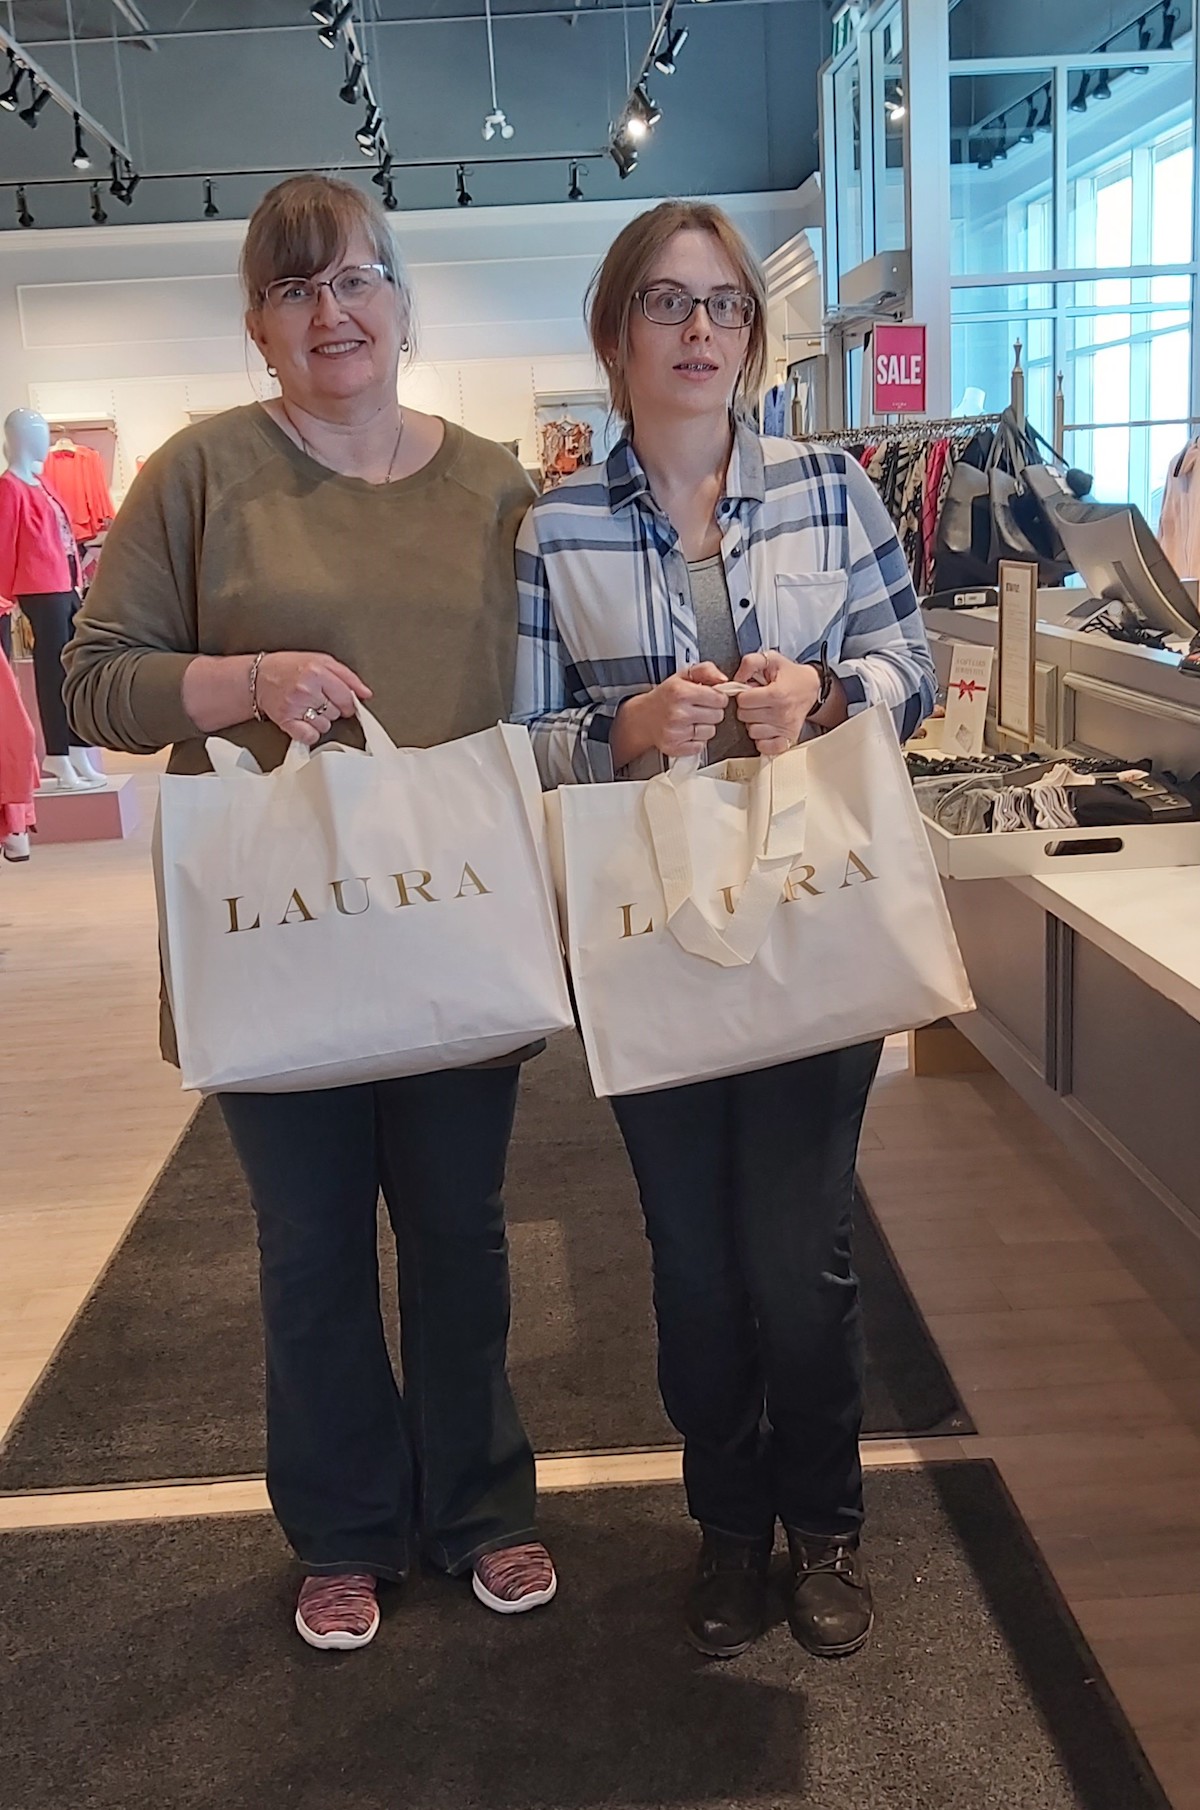 A mother and daughter holding donated clothing items at a Laura store.